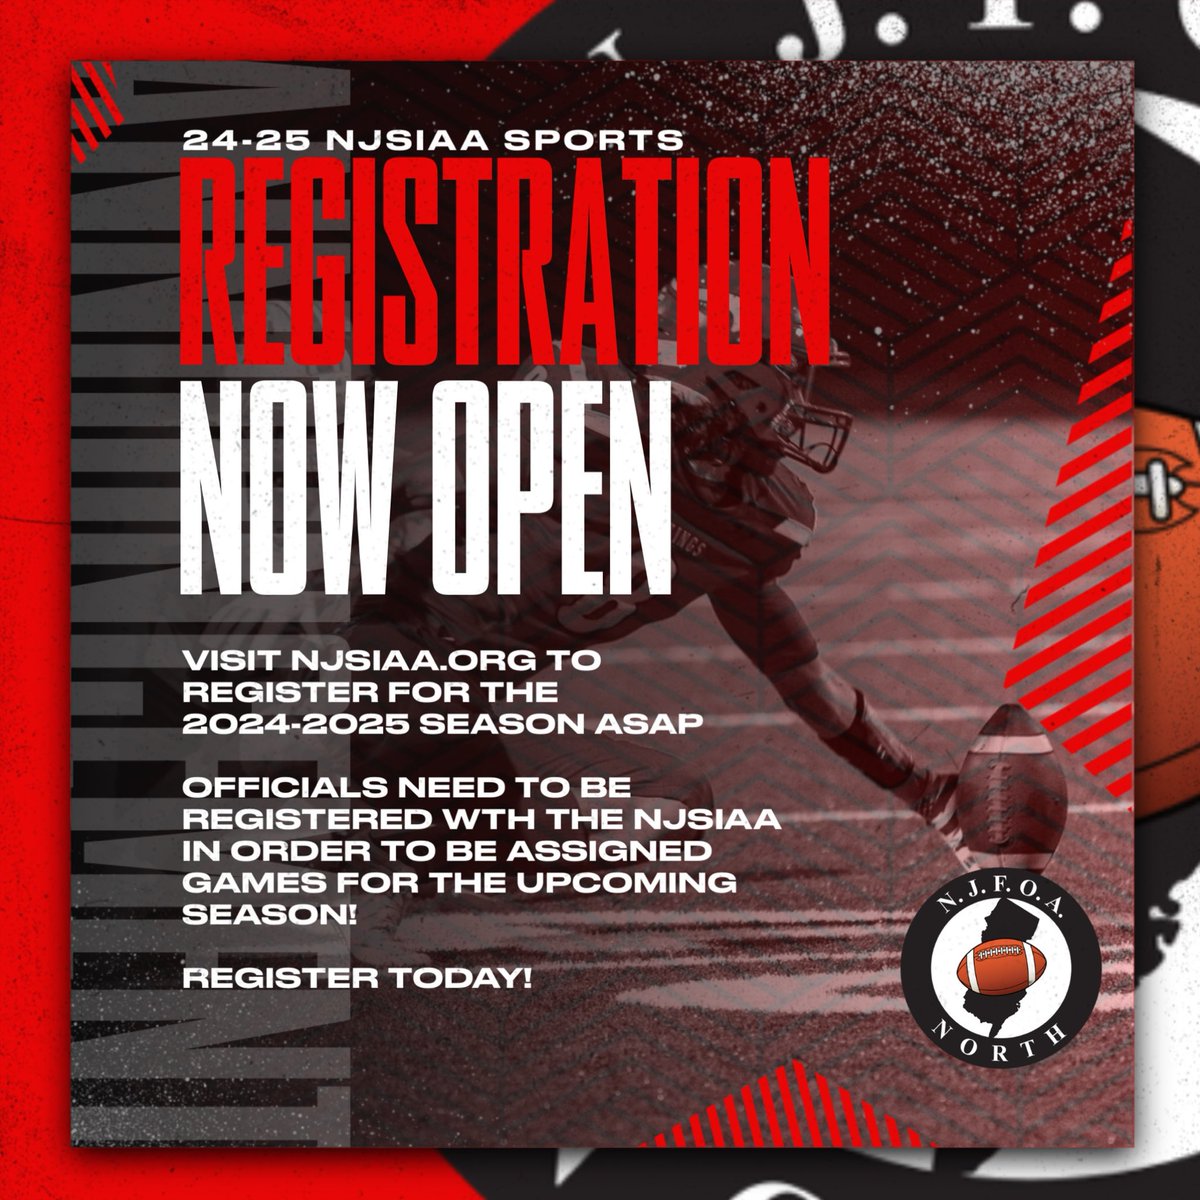 NJSIAA REGISTRSTION FOR 24-25 IS OPEN! All officials must be registered with the NJSIAA in order to be assigned games for the upcoming season. Visit njsiaa.org to register today! #football #referees #njfoa